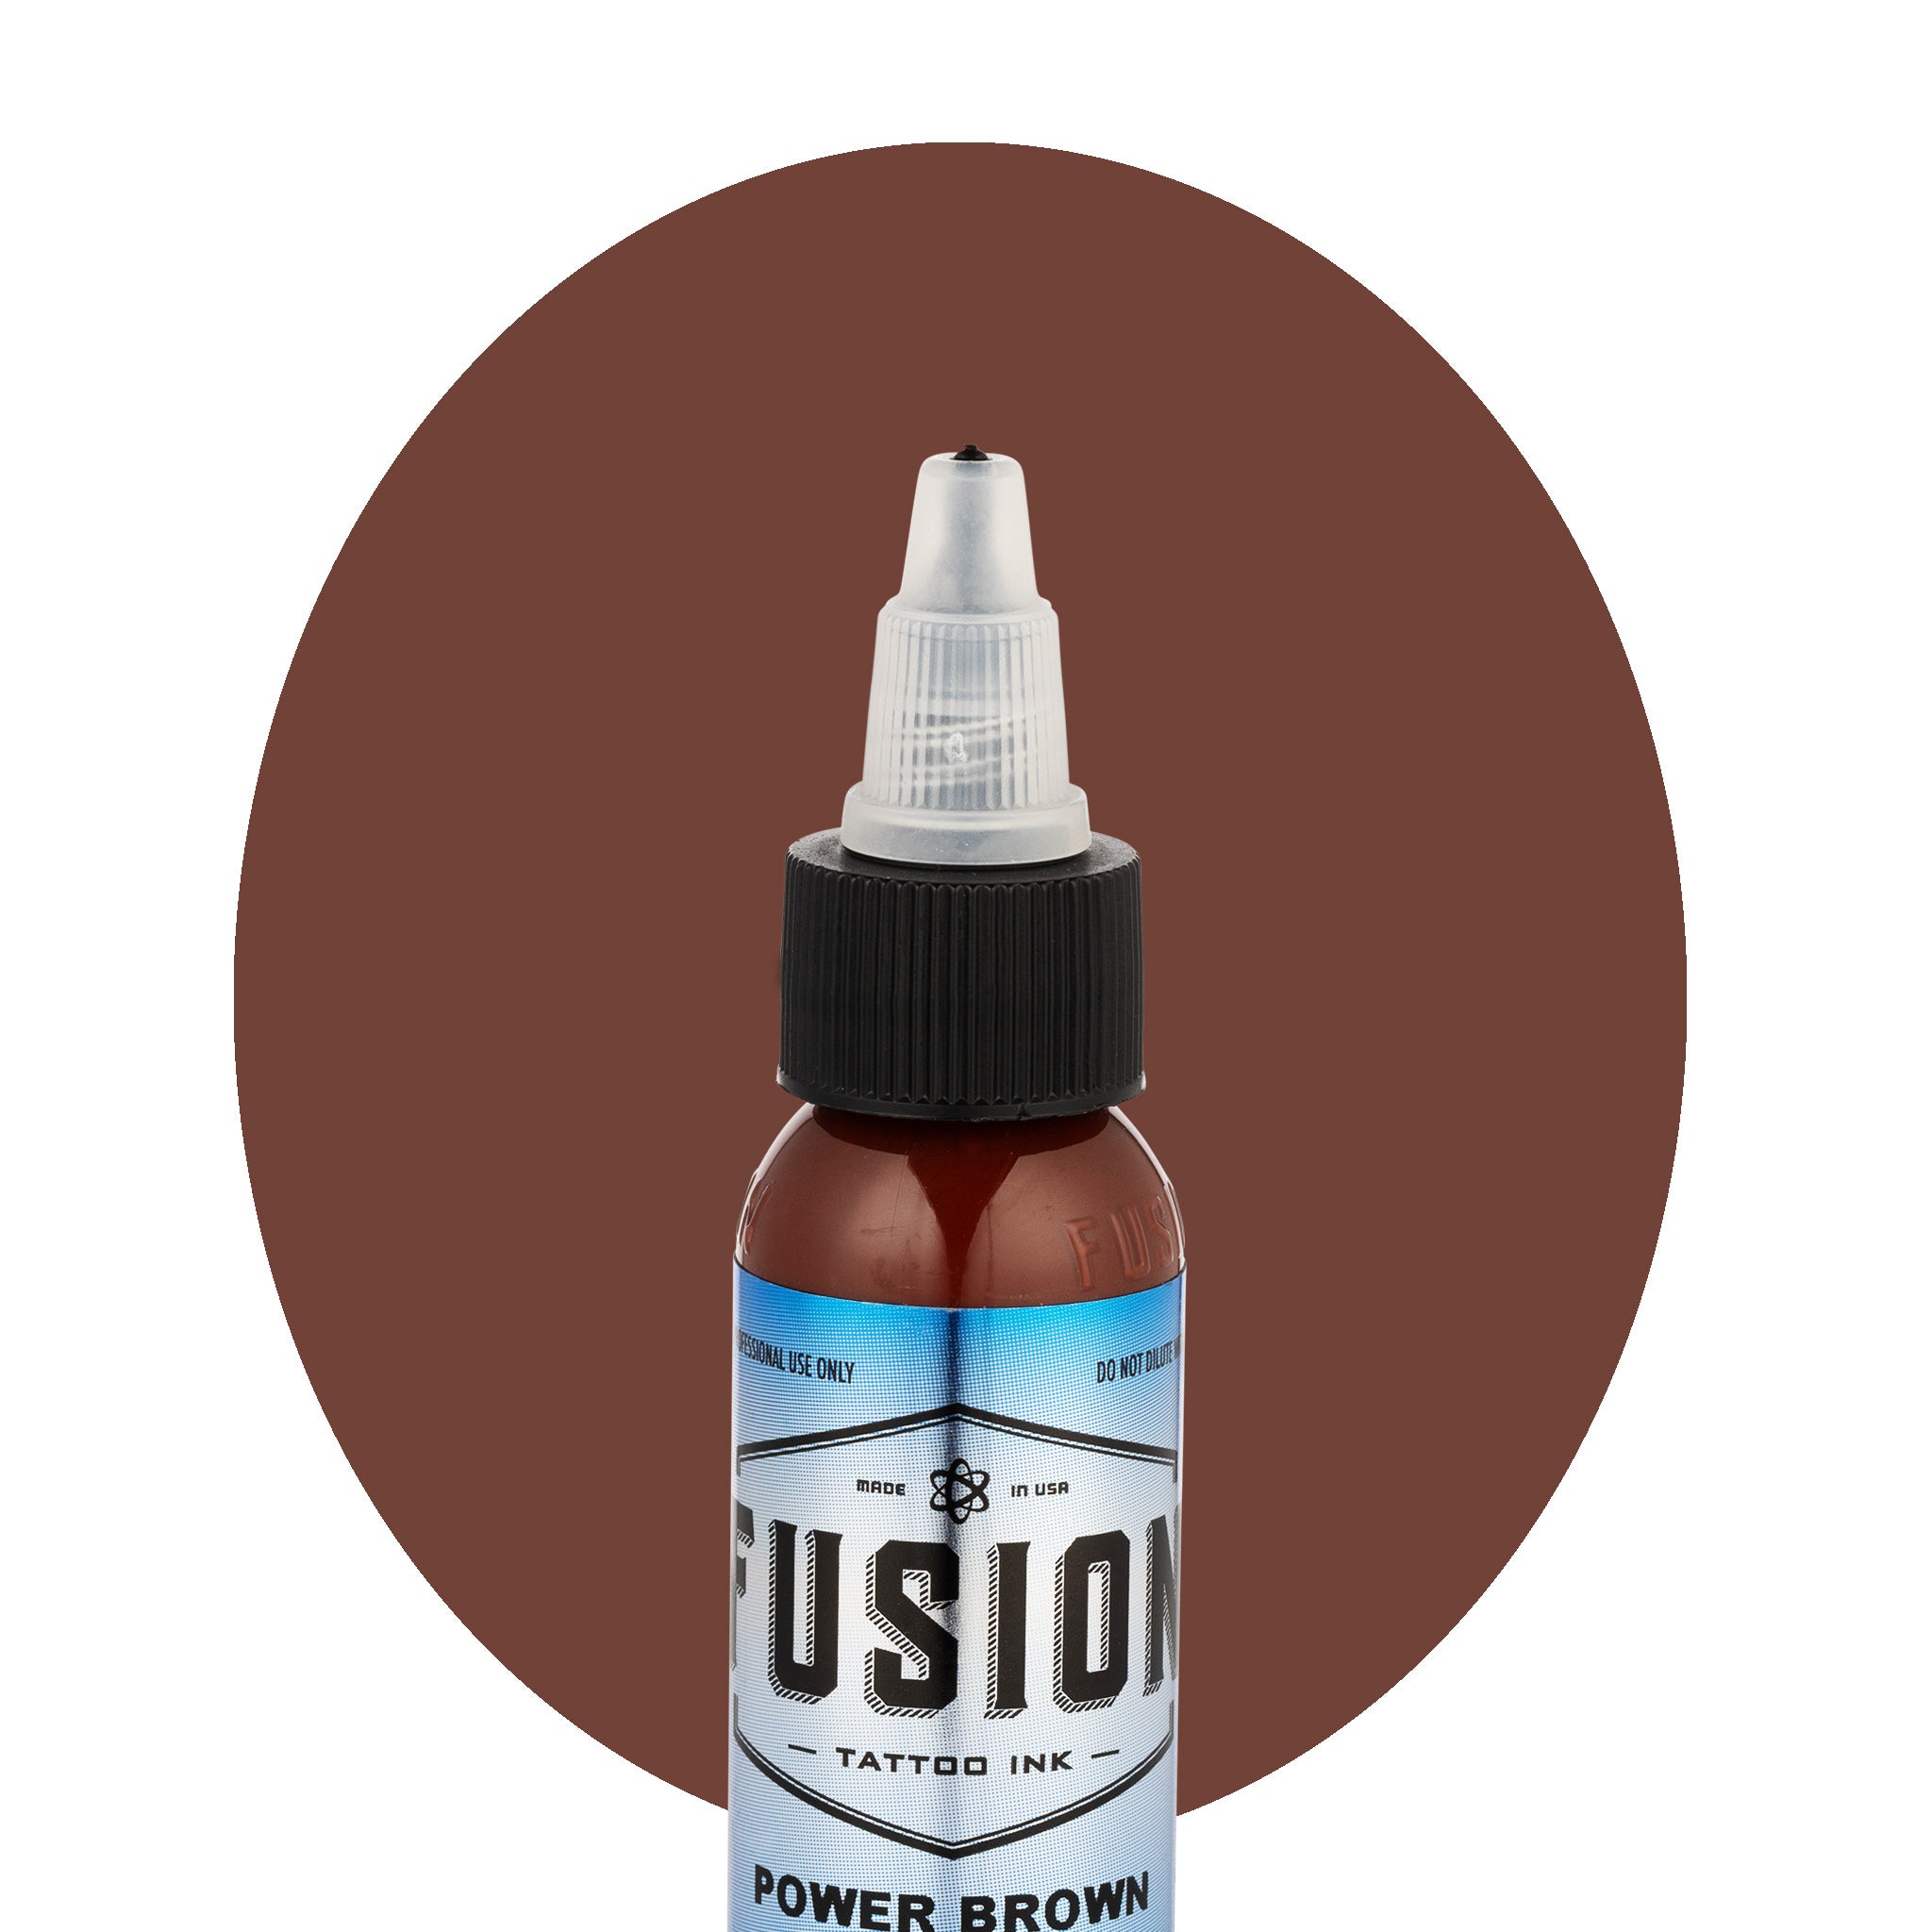 Fusion Power Brown Tattoo Ink 2 oz.